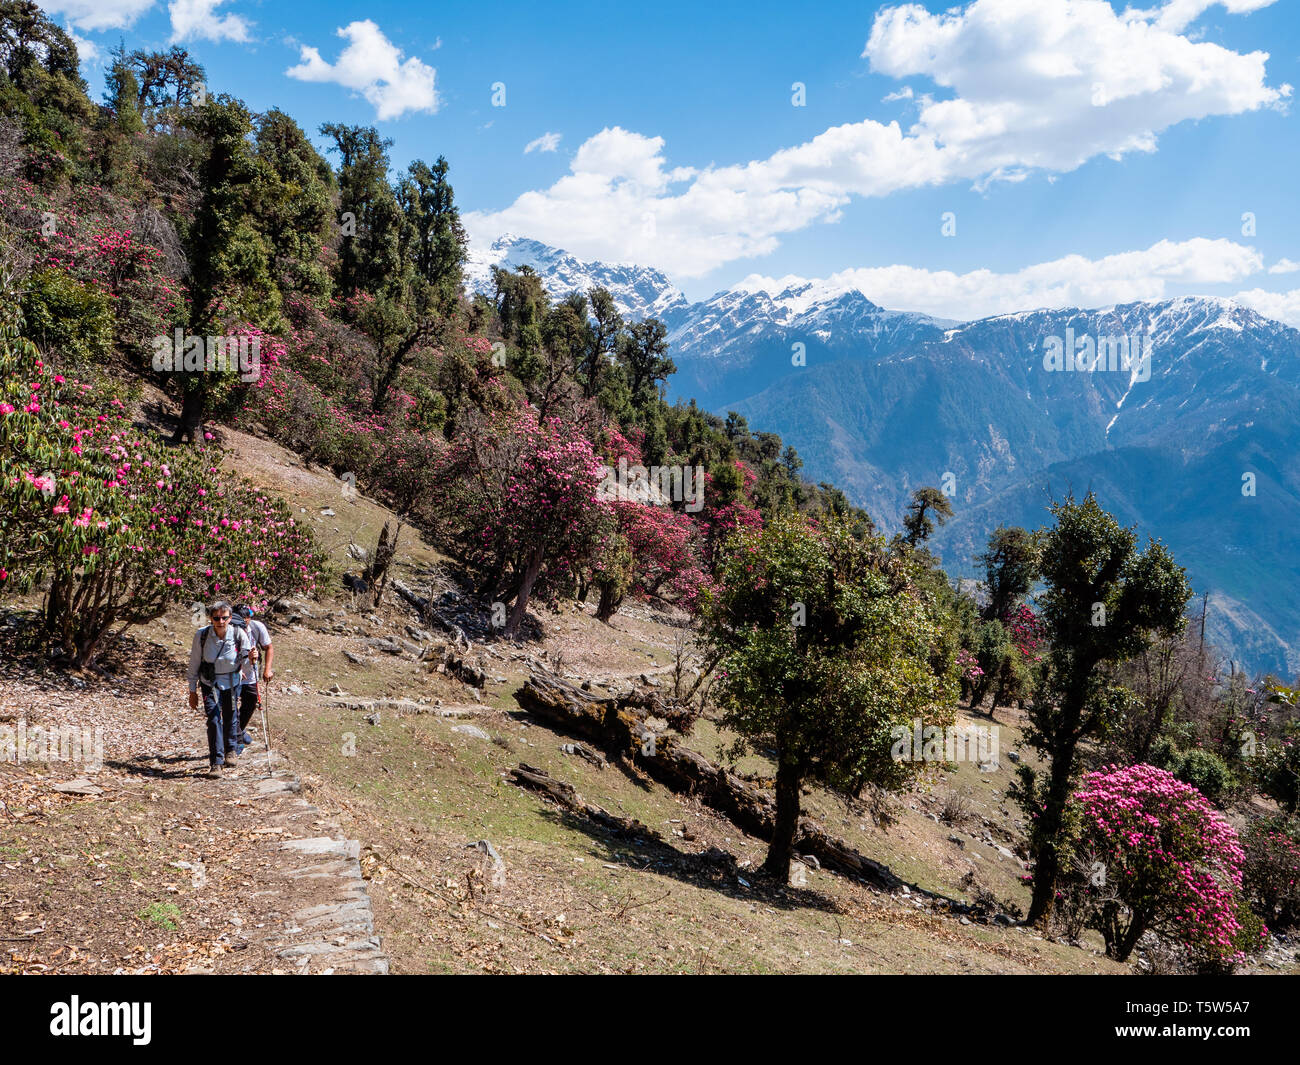 Walking amongst oak and rhododendron forest on steep mountain paths above the Saryu Valley in the Himalayas of Uttarakhand in Northern India Stock Photo